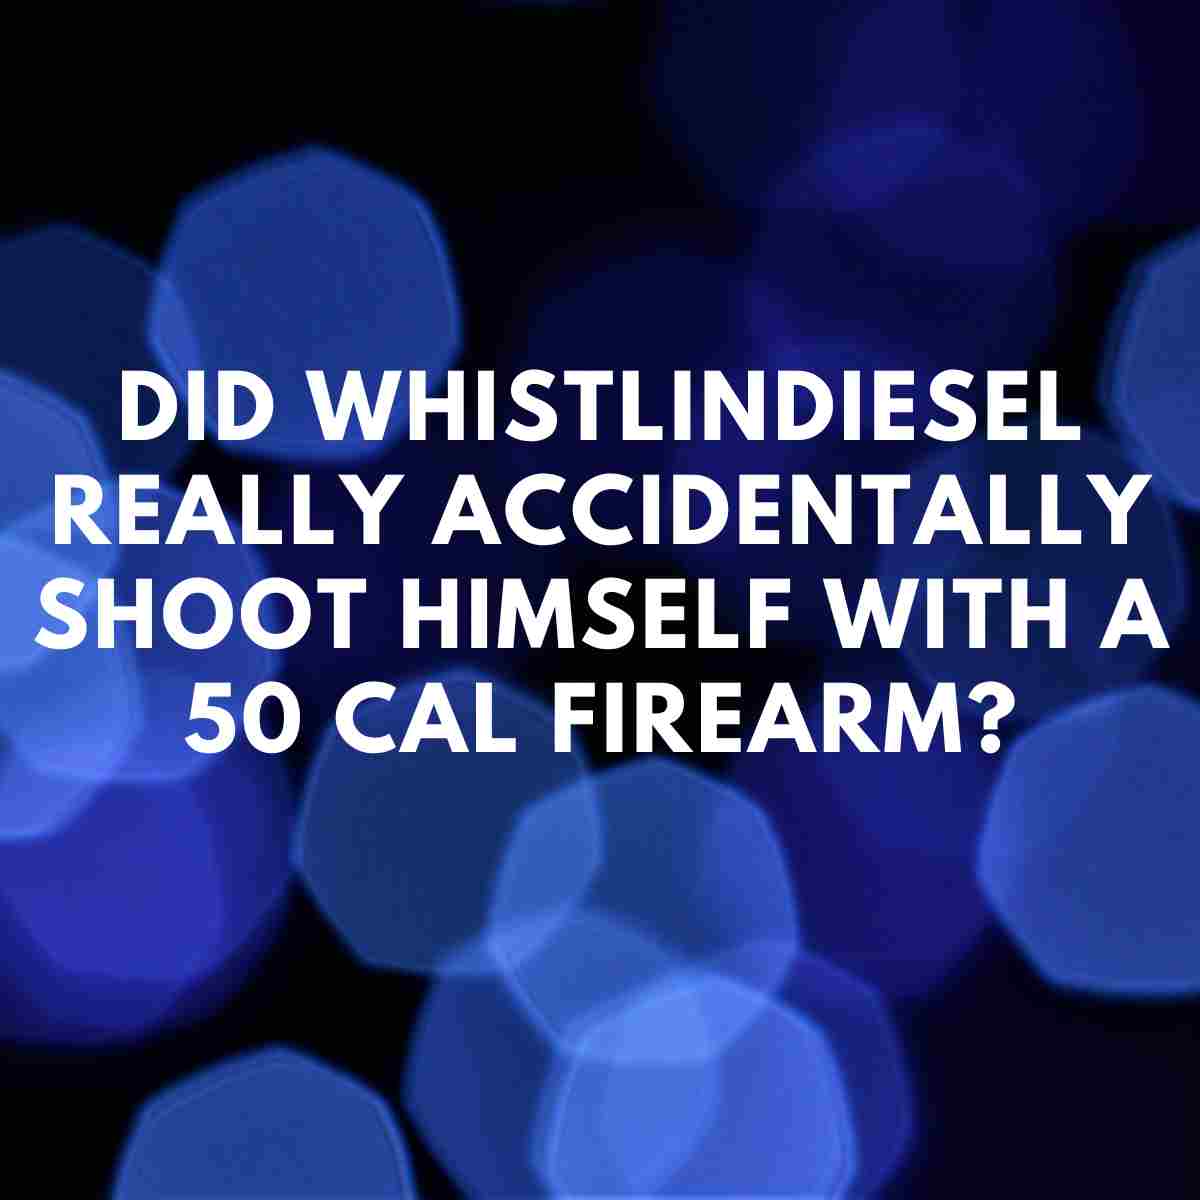 Did WhistlinDiesel really accidentally shoot himself with a 50 cal